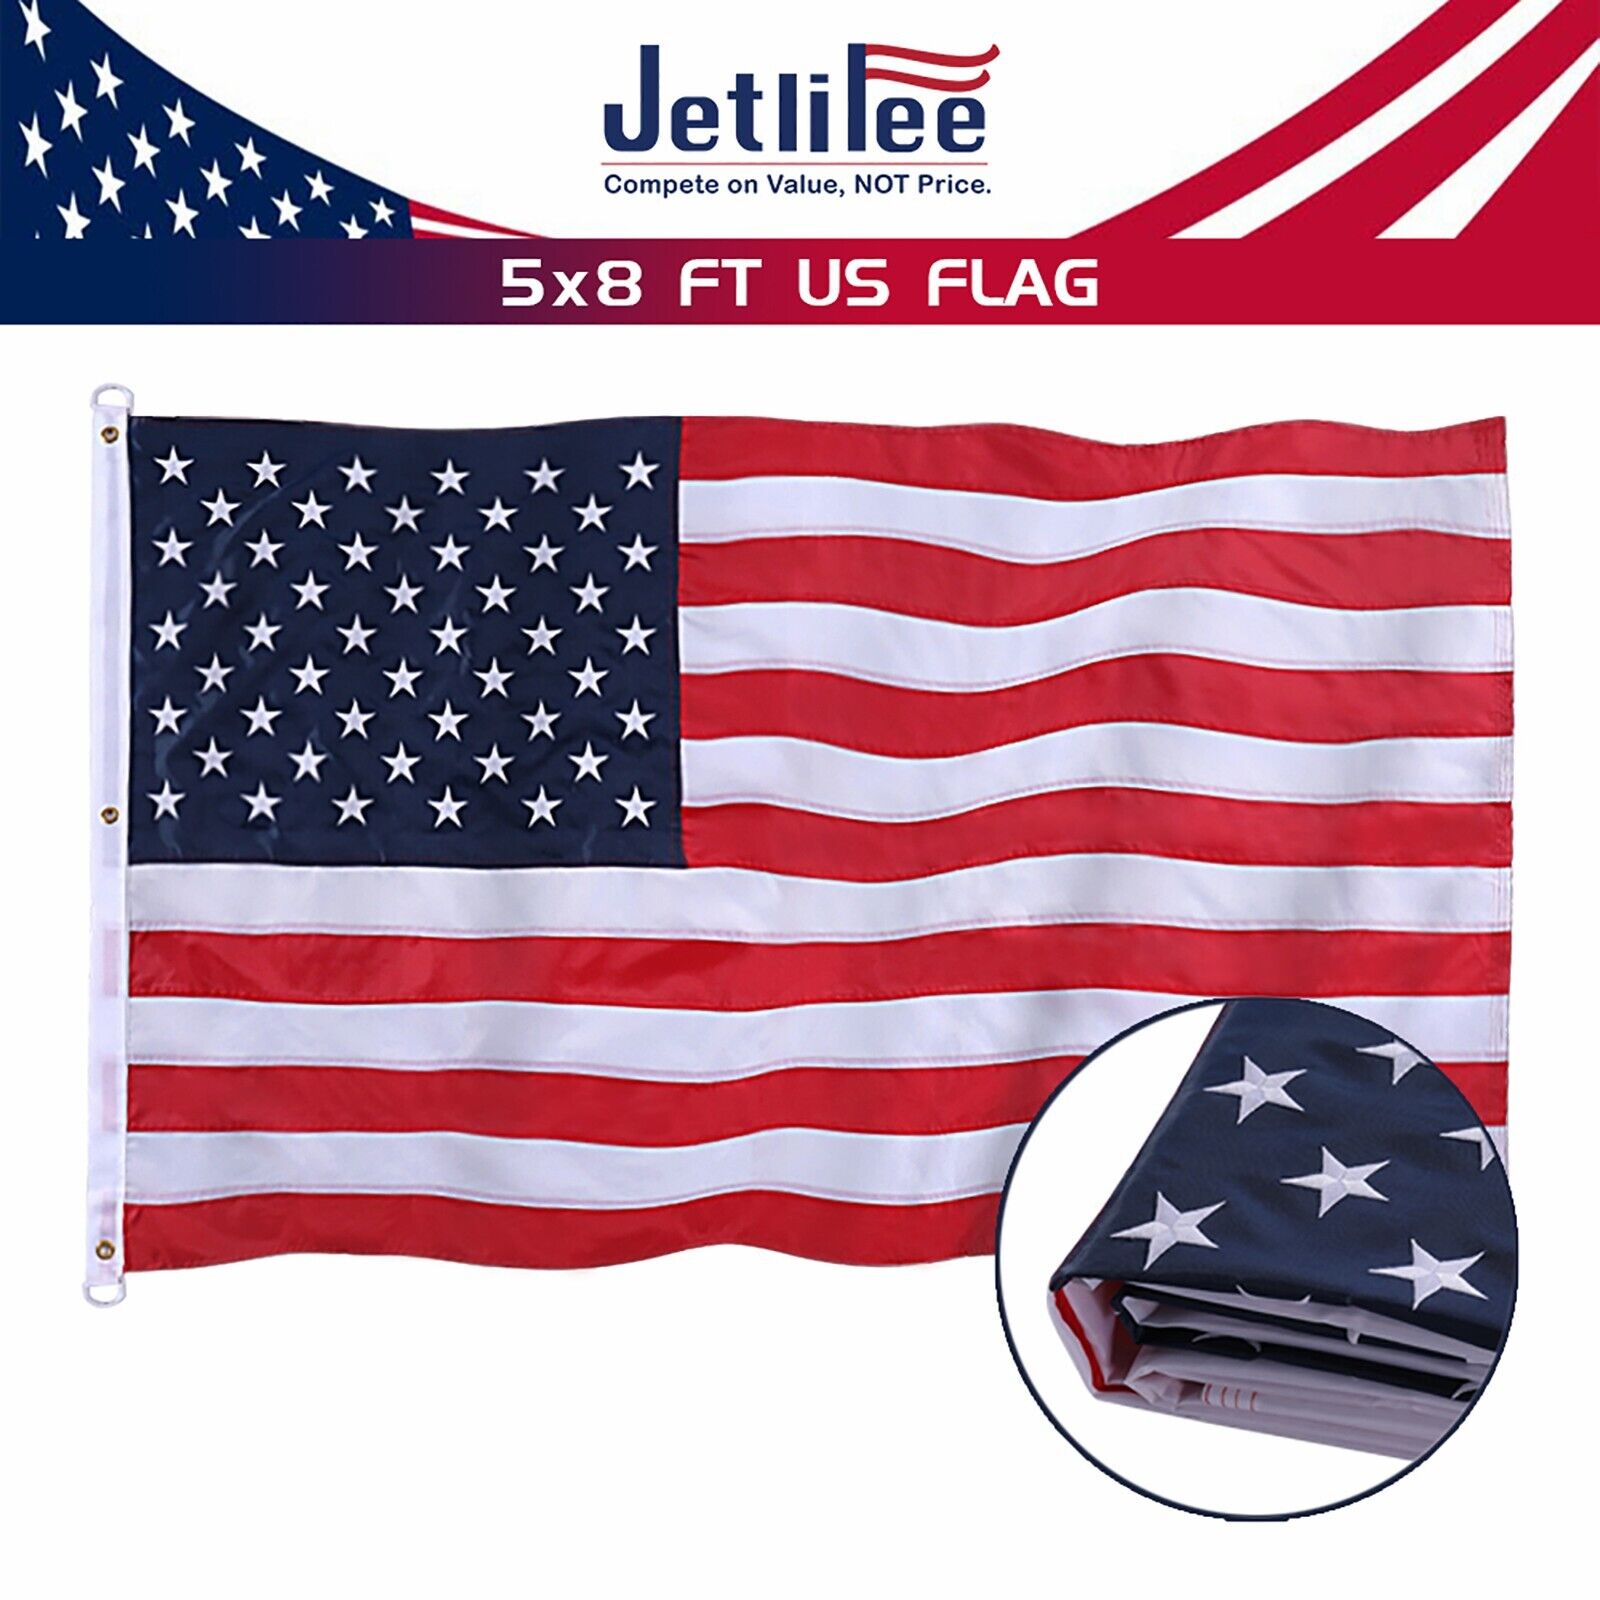 Jetlifee 5x8 FT USA US American Flag Heavy Duty 210D Polyester Double Embrodered